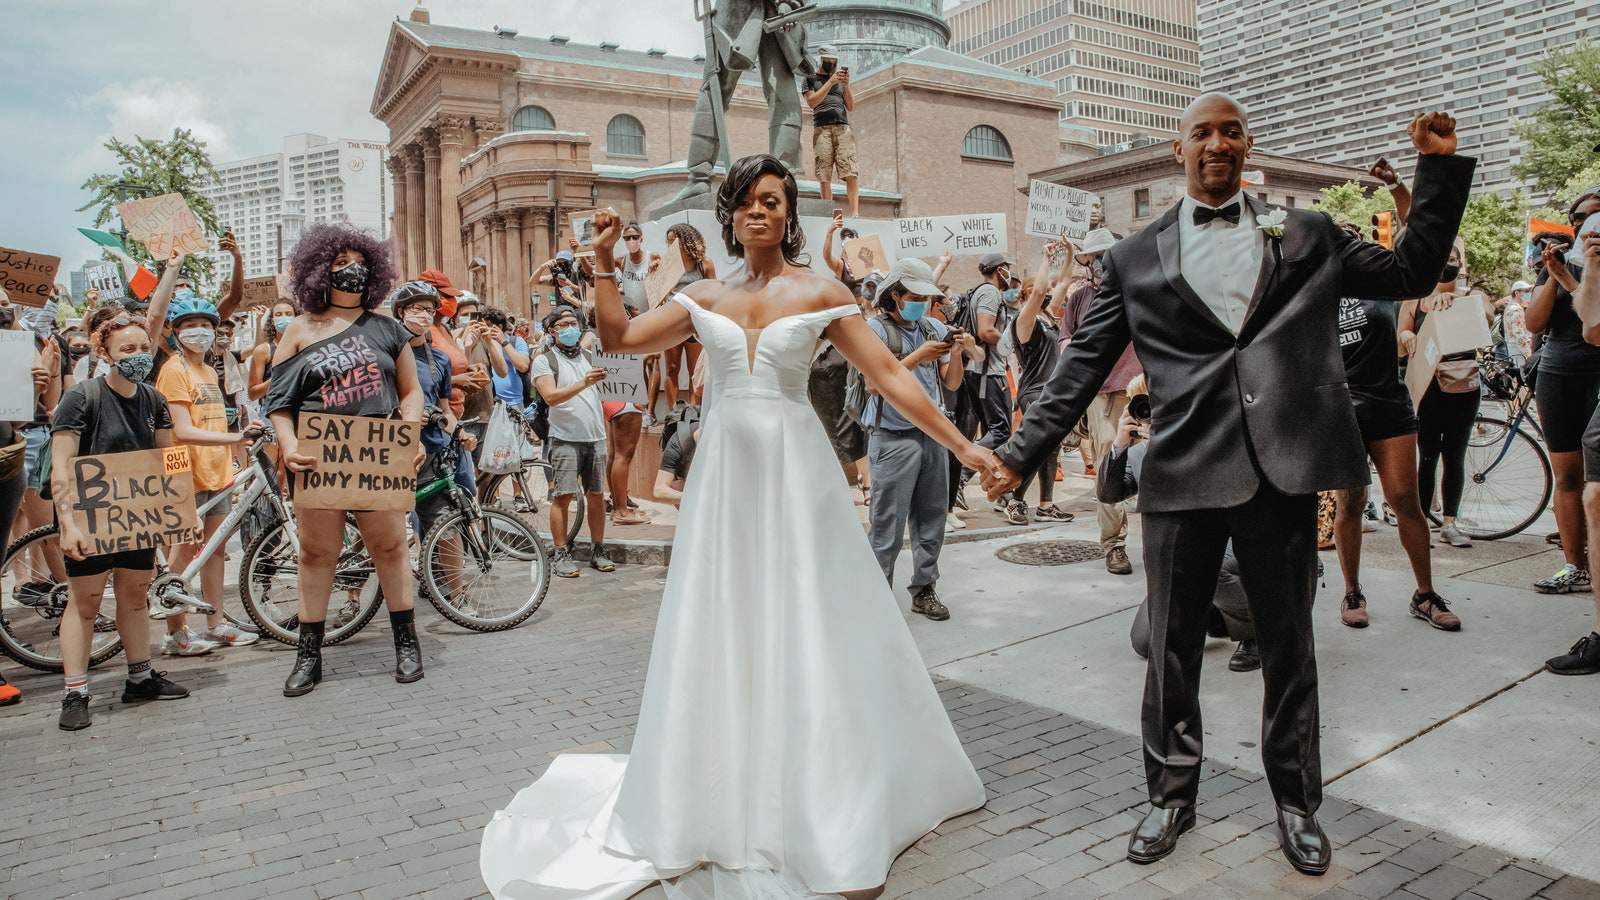 This couple’s wedding first look happened in front of a Black Lives Matter protest